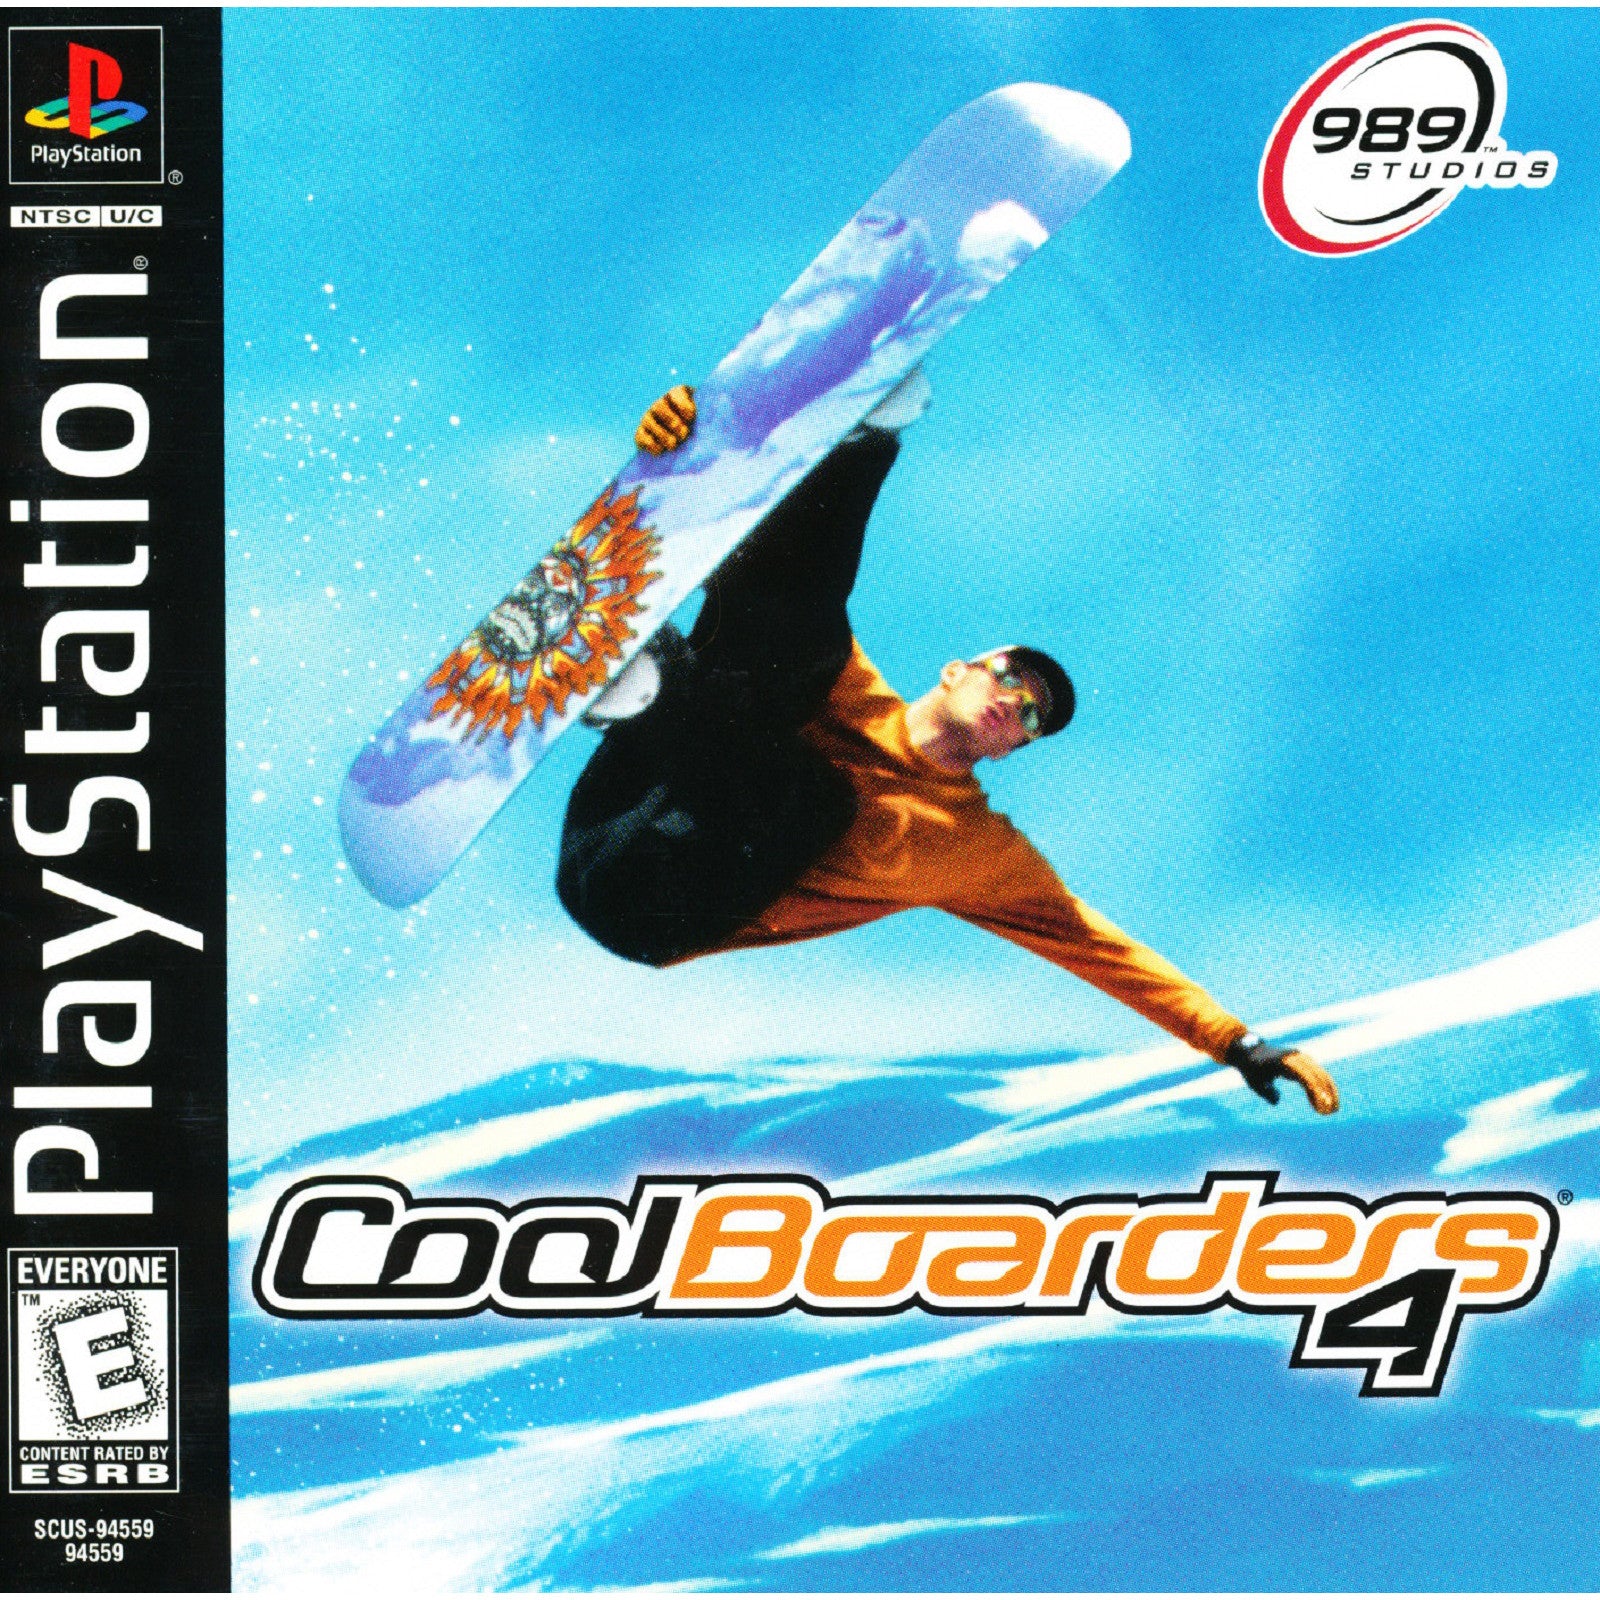 Cool Boarders 4 for PlayStation 1